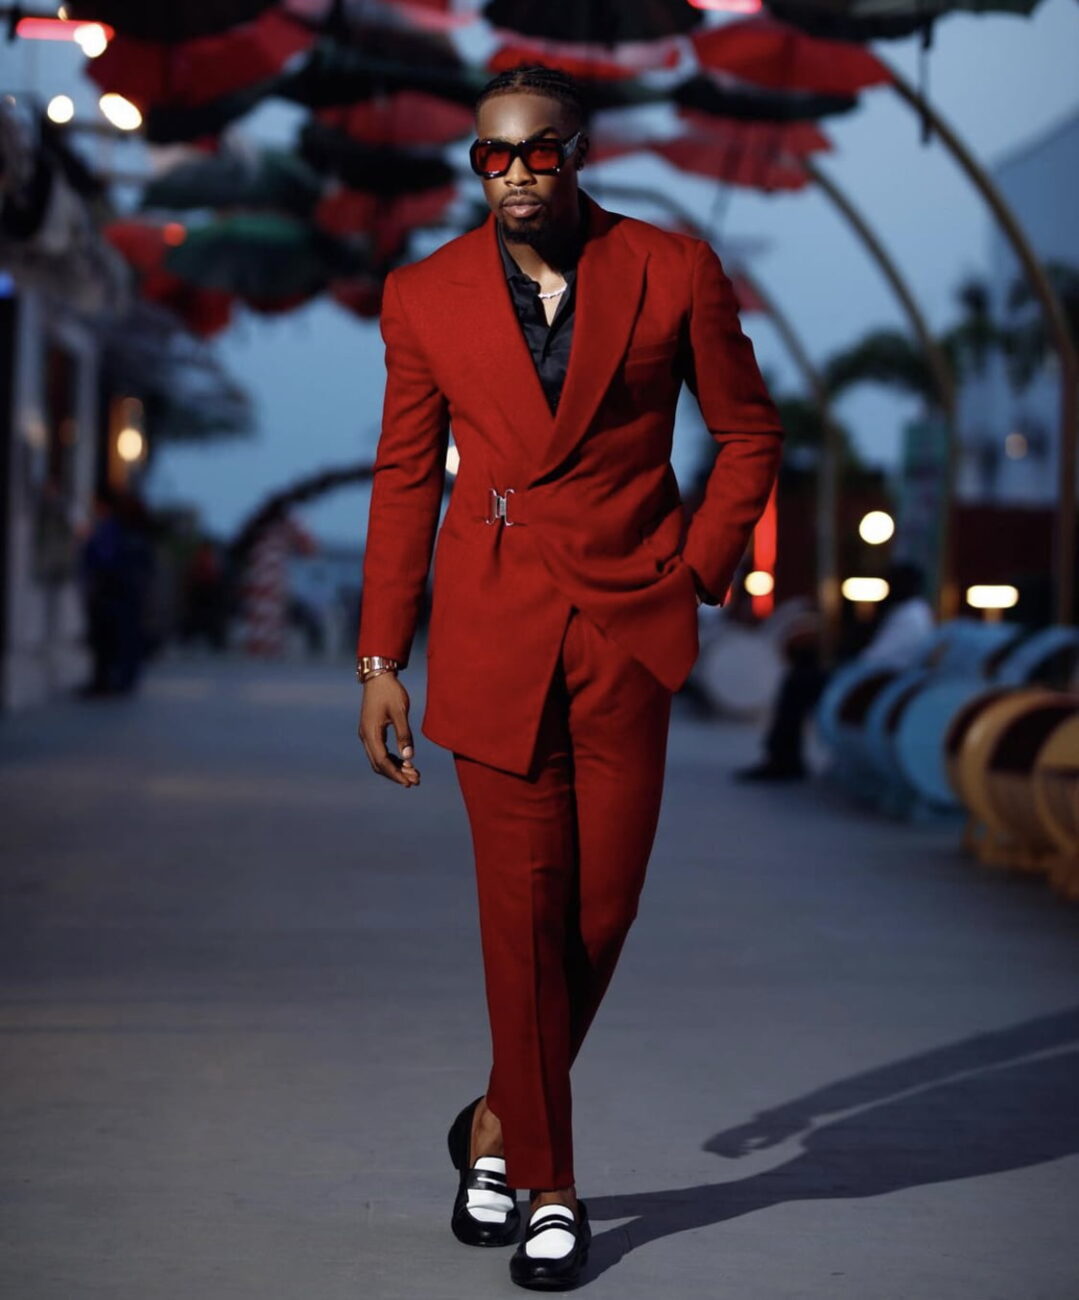 Neo Akpofure in a red suit.